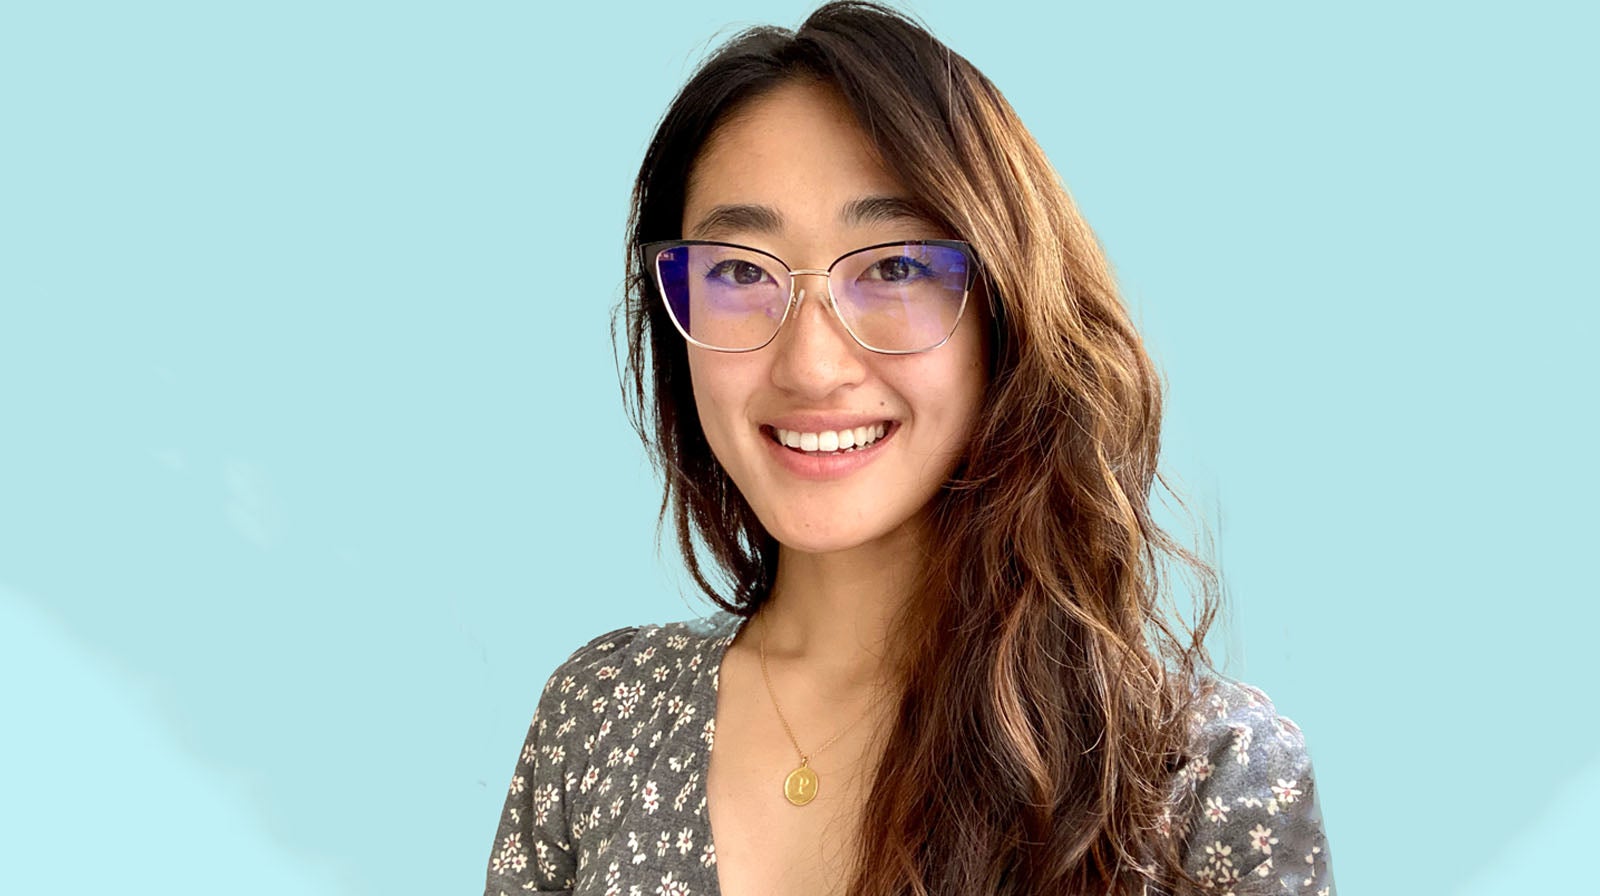 Rice CS alumna Mei Tan (’17) found her sweet spot with ed tech startup Pioneer